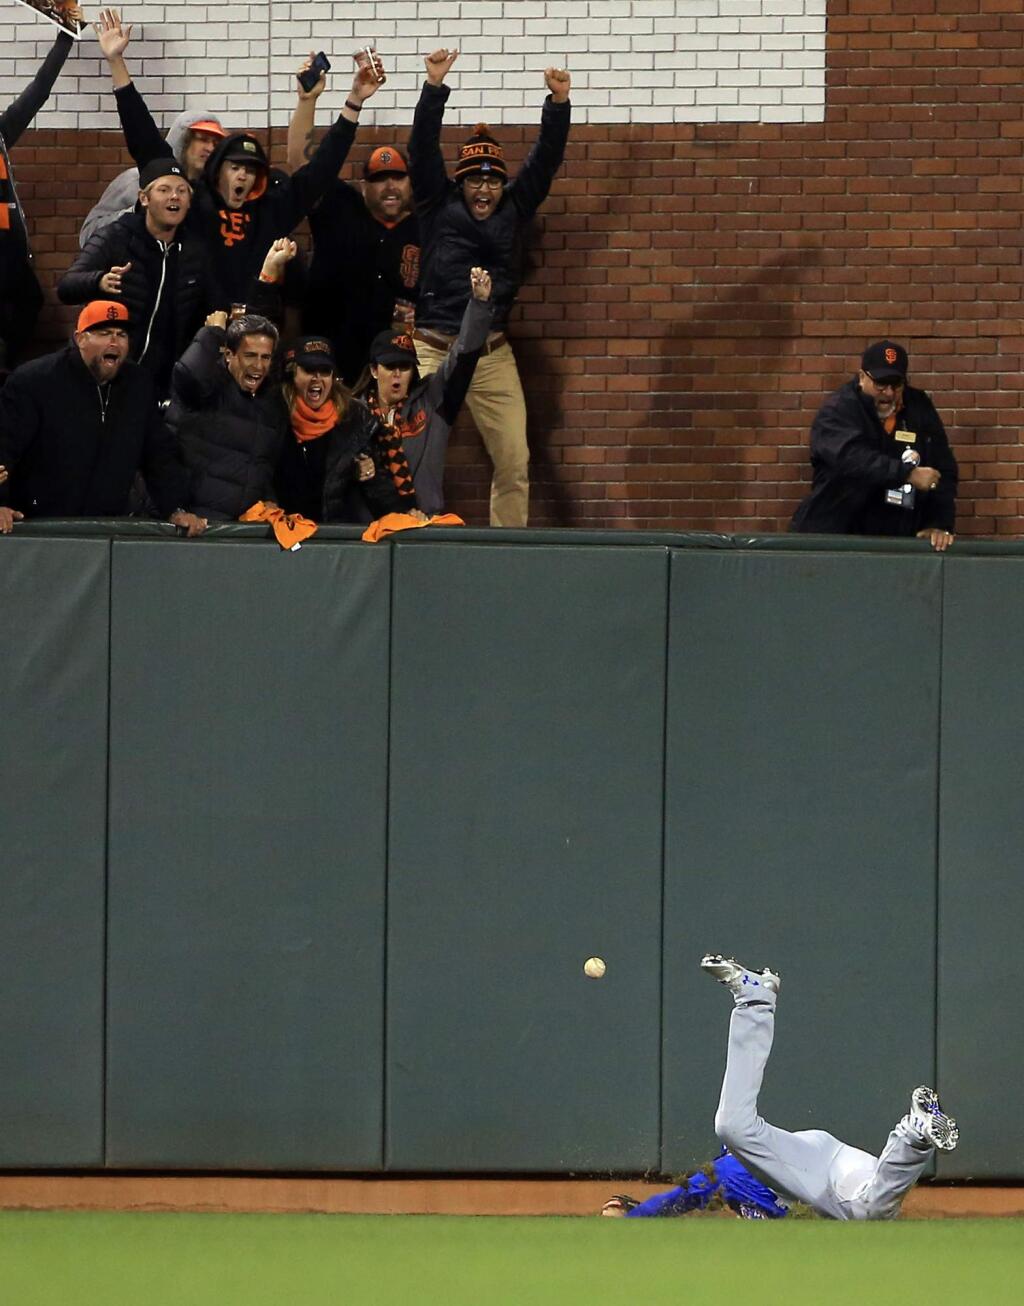 Chicago's Albert Almora Jr. fails to catch a triple by Conor Gillaspie which scored two runs in the eighth inning of Game 3 during the NLDS at AT&T Park in San Francisco, Monday, Oct. 10, 2016. (Kent Porter / The Press Democrat)